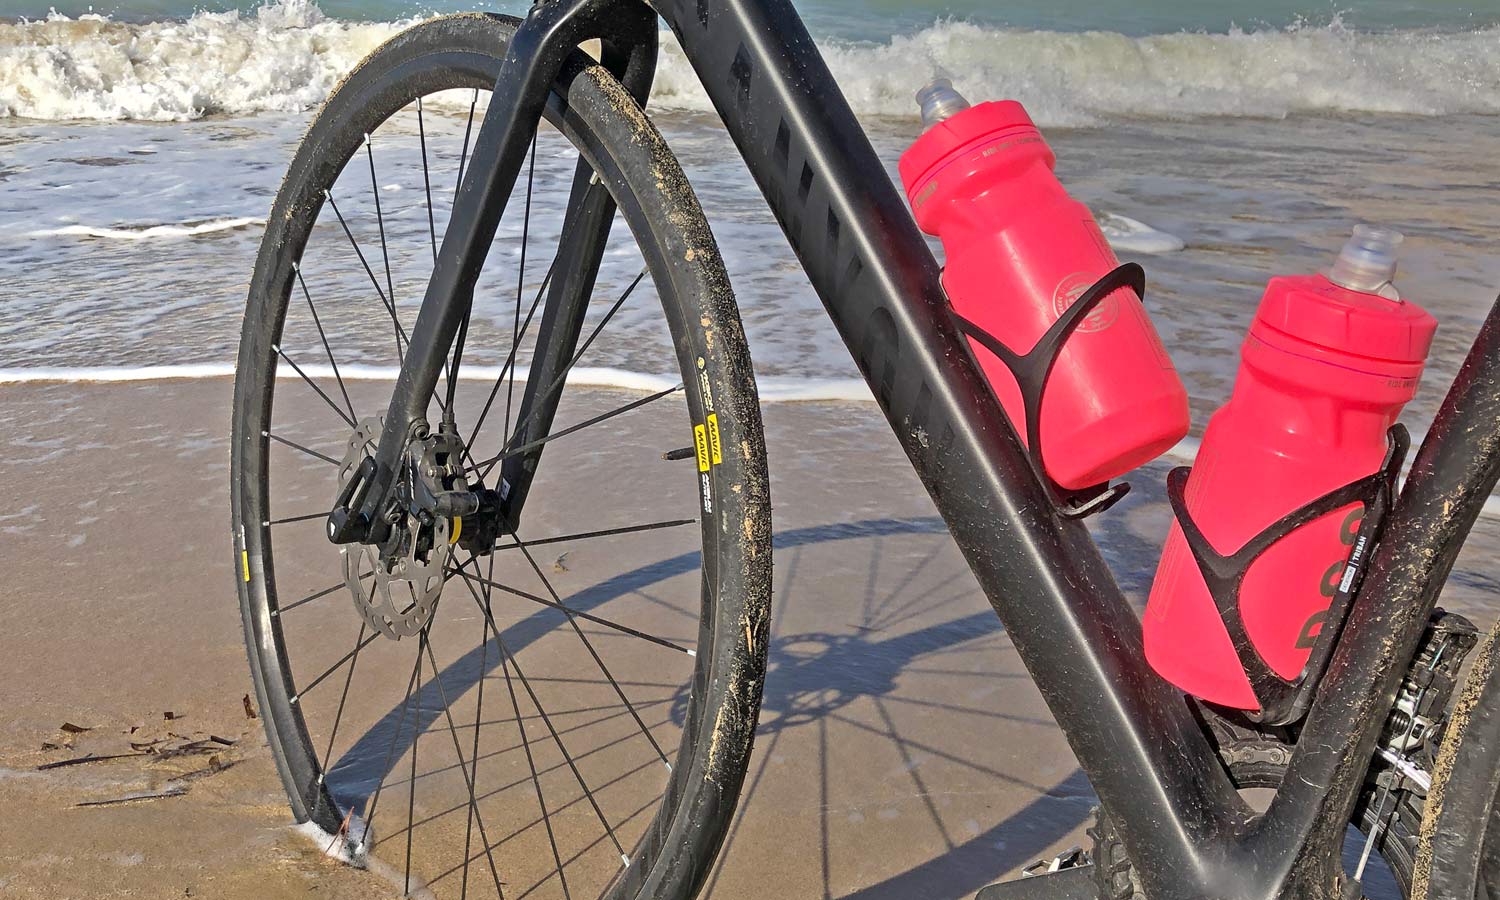 Decathlon Triban cage review, low-cost affordable lightweight secure reinforced plastic water bottle cage bidon holder